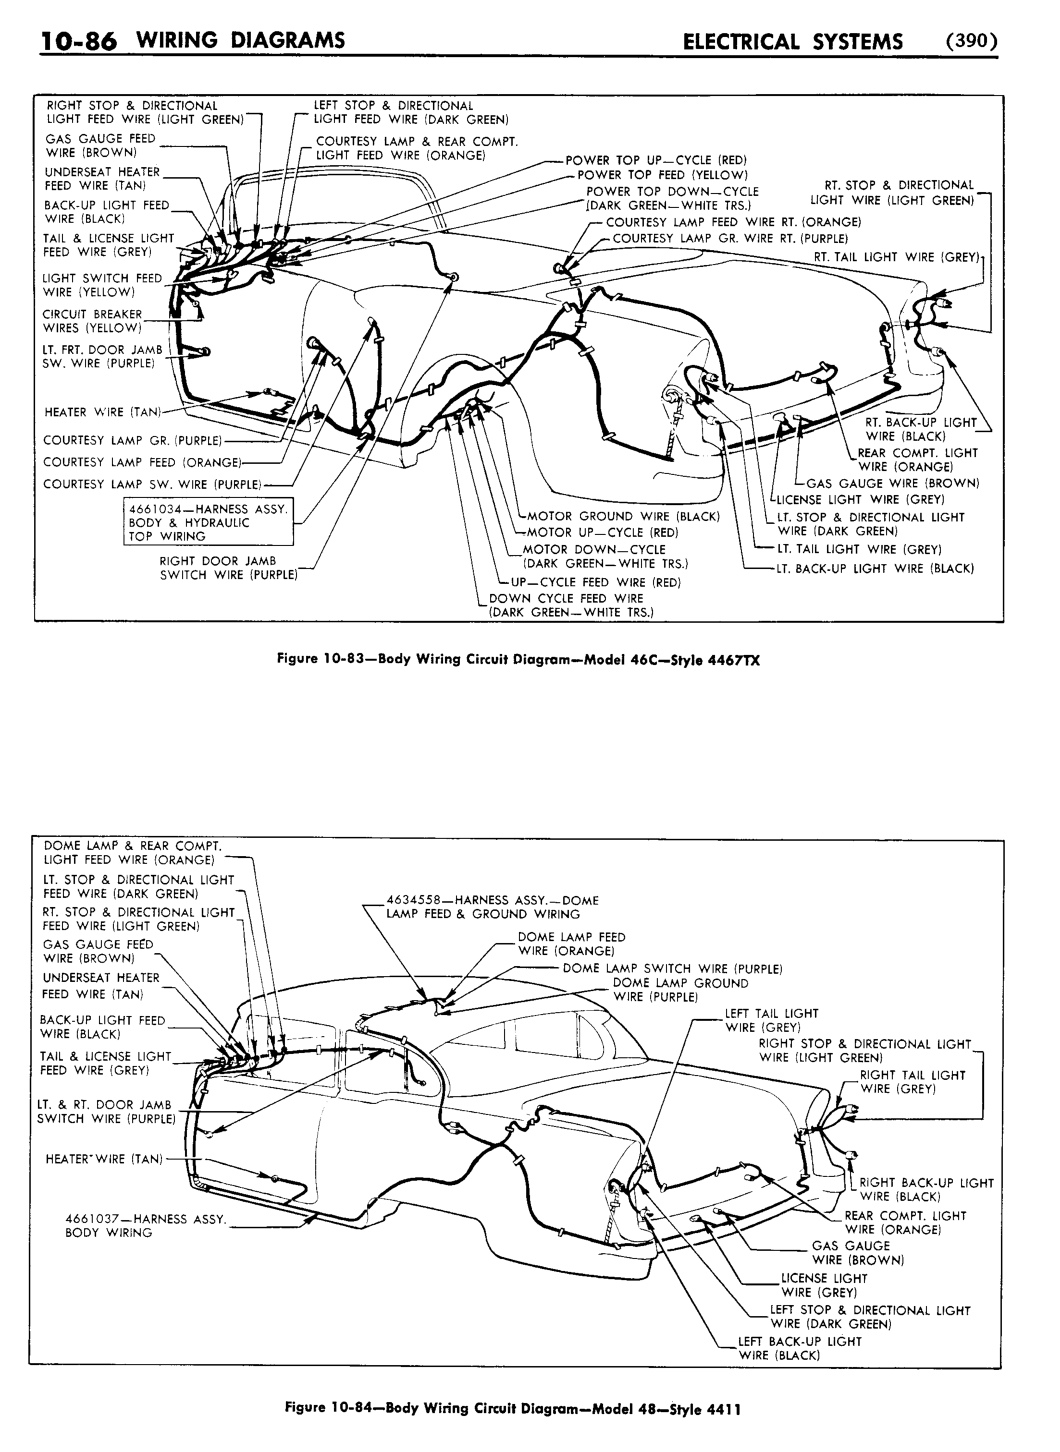 n_11 1955 Buick Shop Manual - Electrical Systems-086-086.jpg